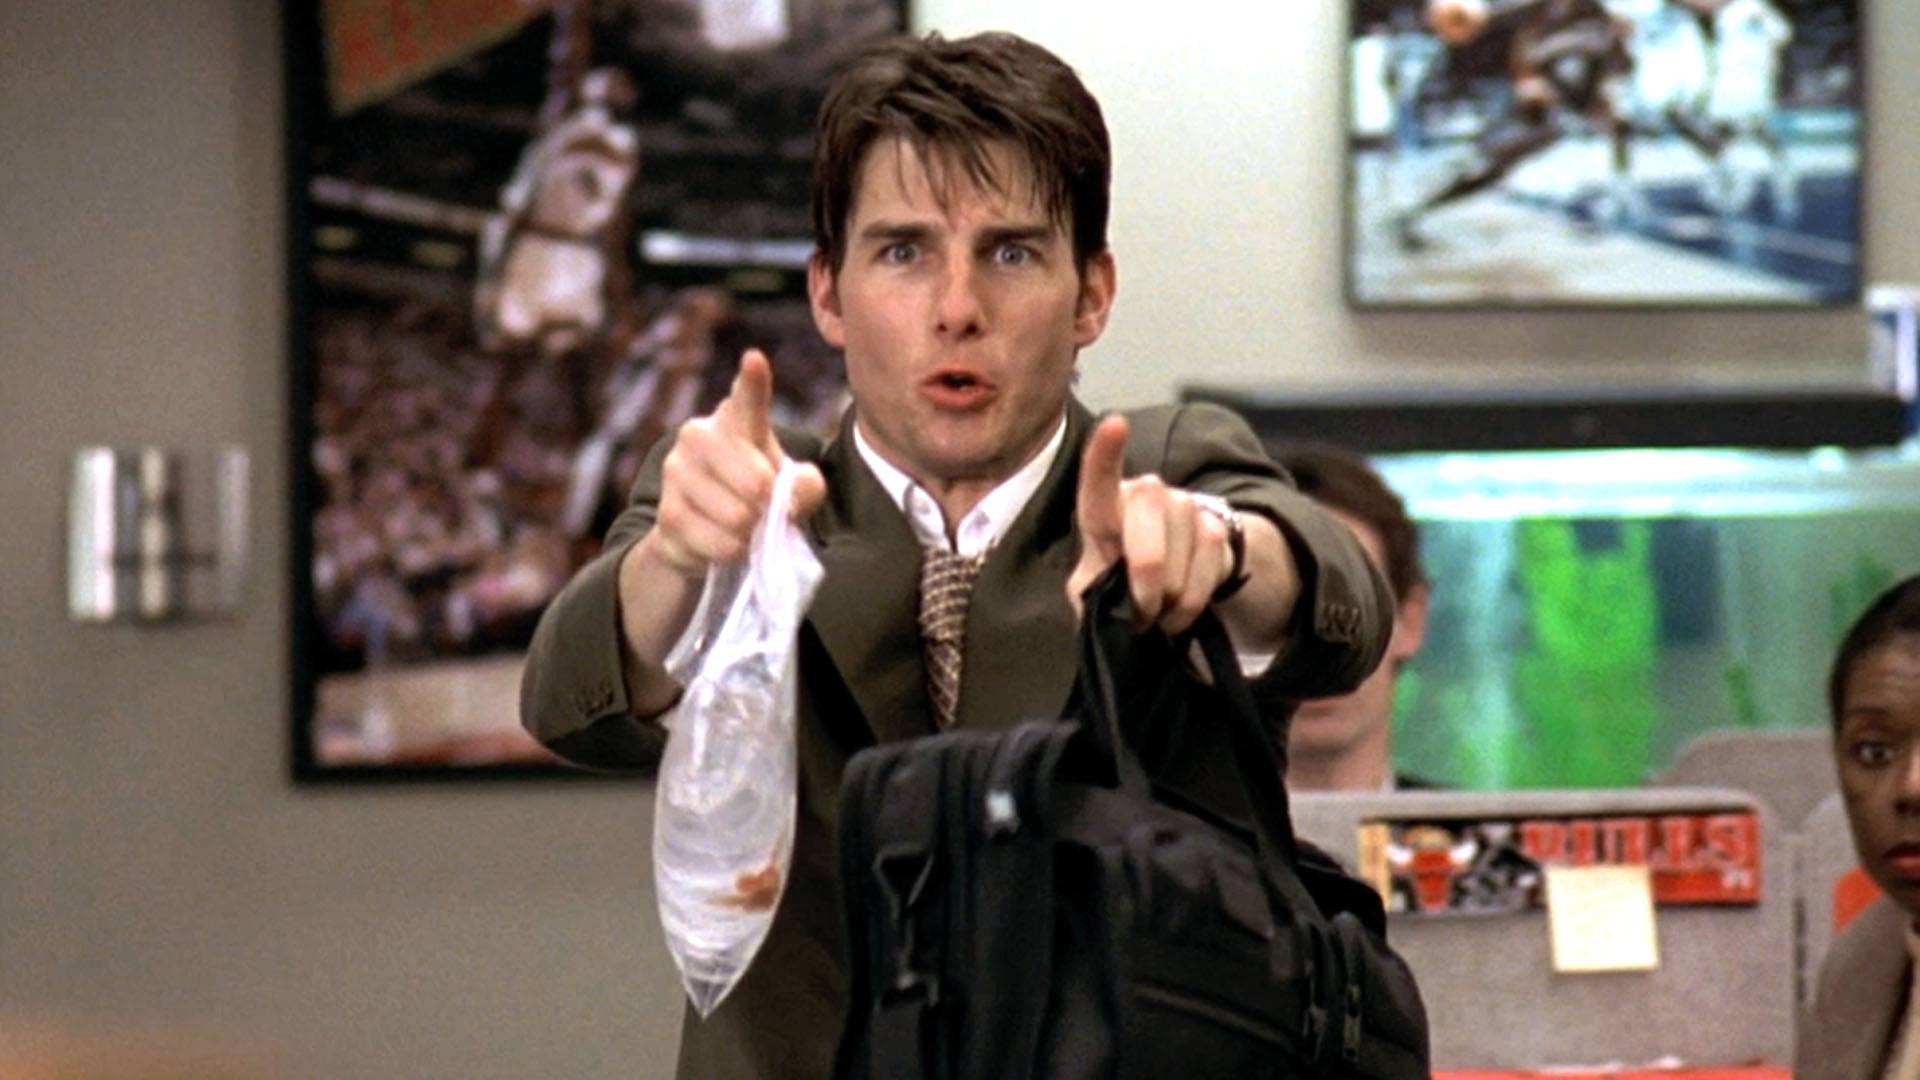 tom cruise quitting his job in jerry maguire, holding a goldfish - career break